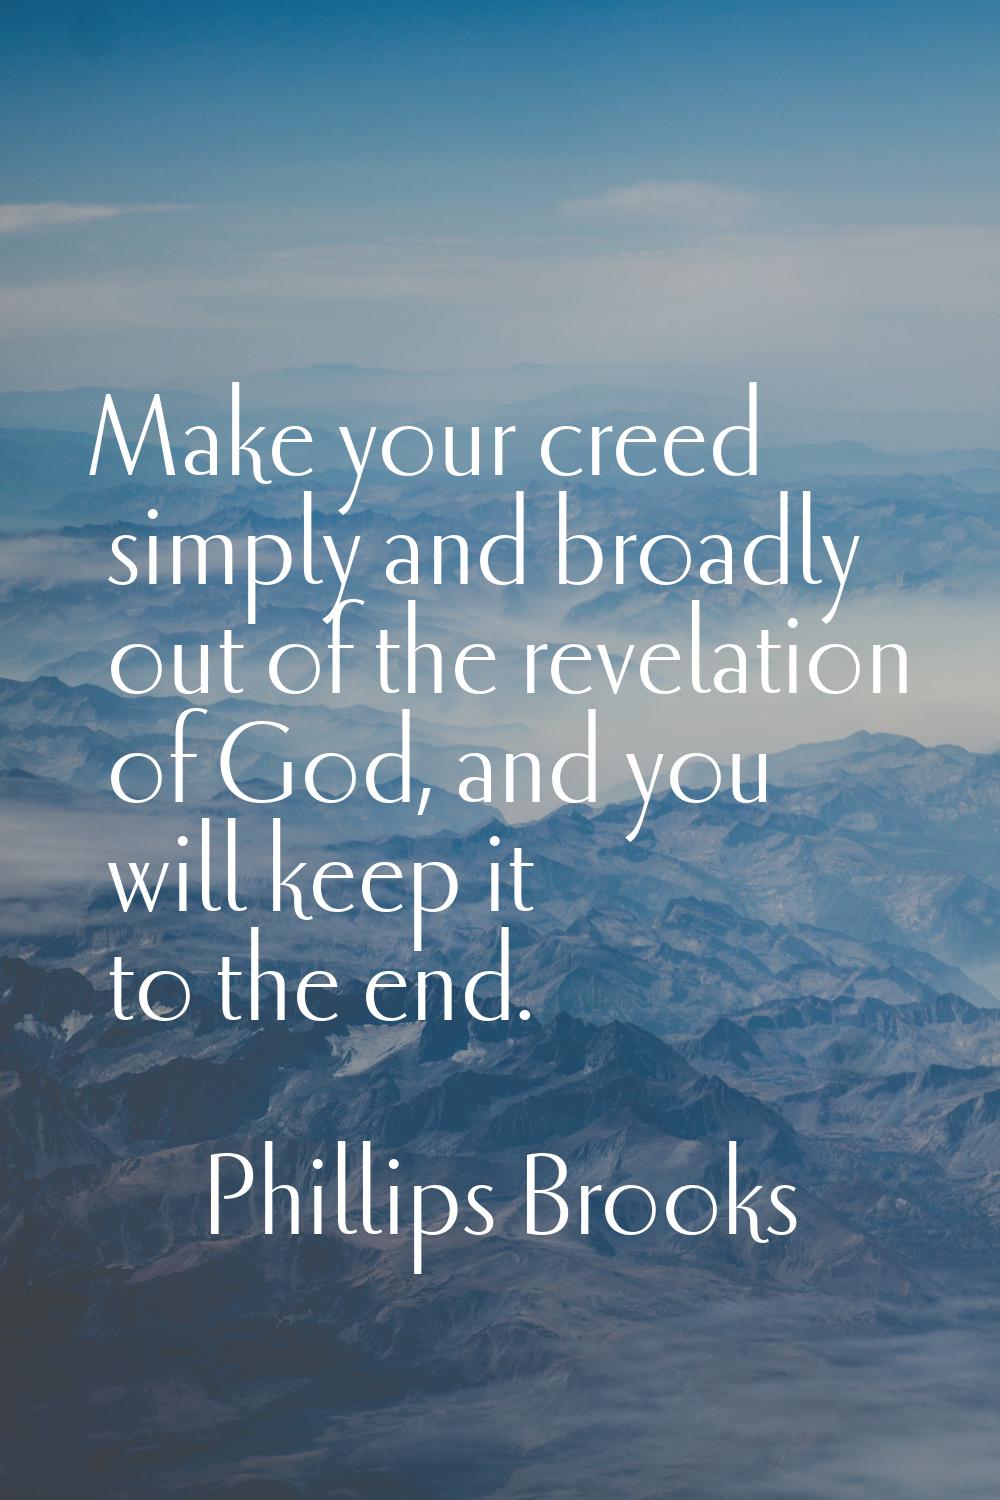 Make your creed simply and broadly out of the revelation of God, and you will keep it to the end.